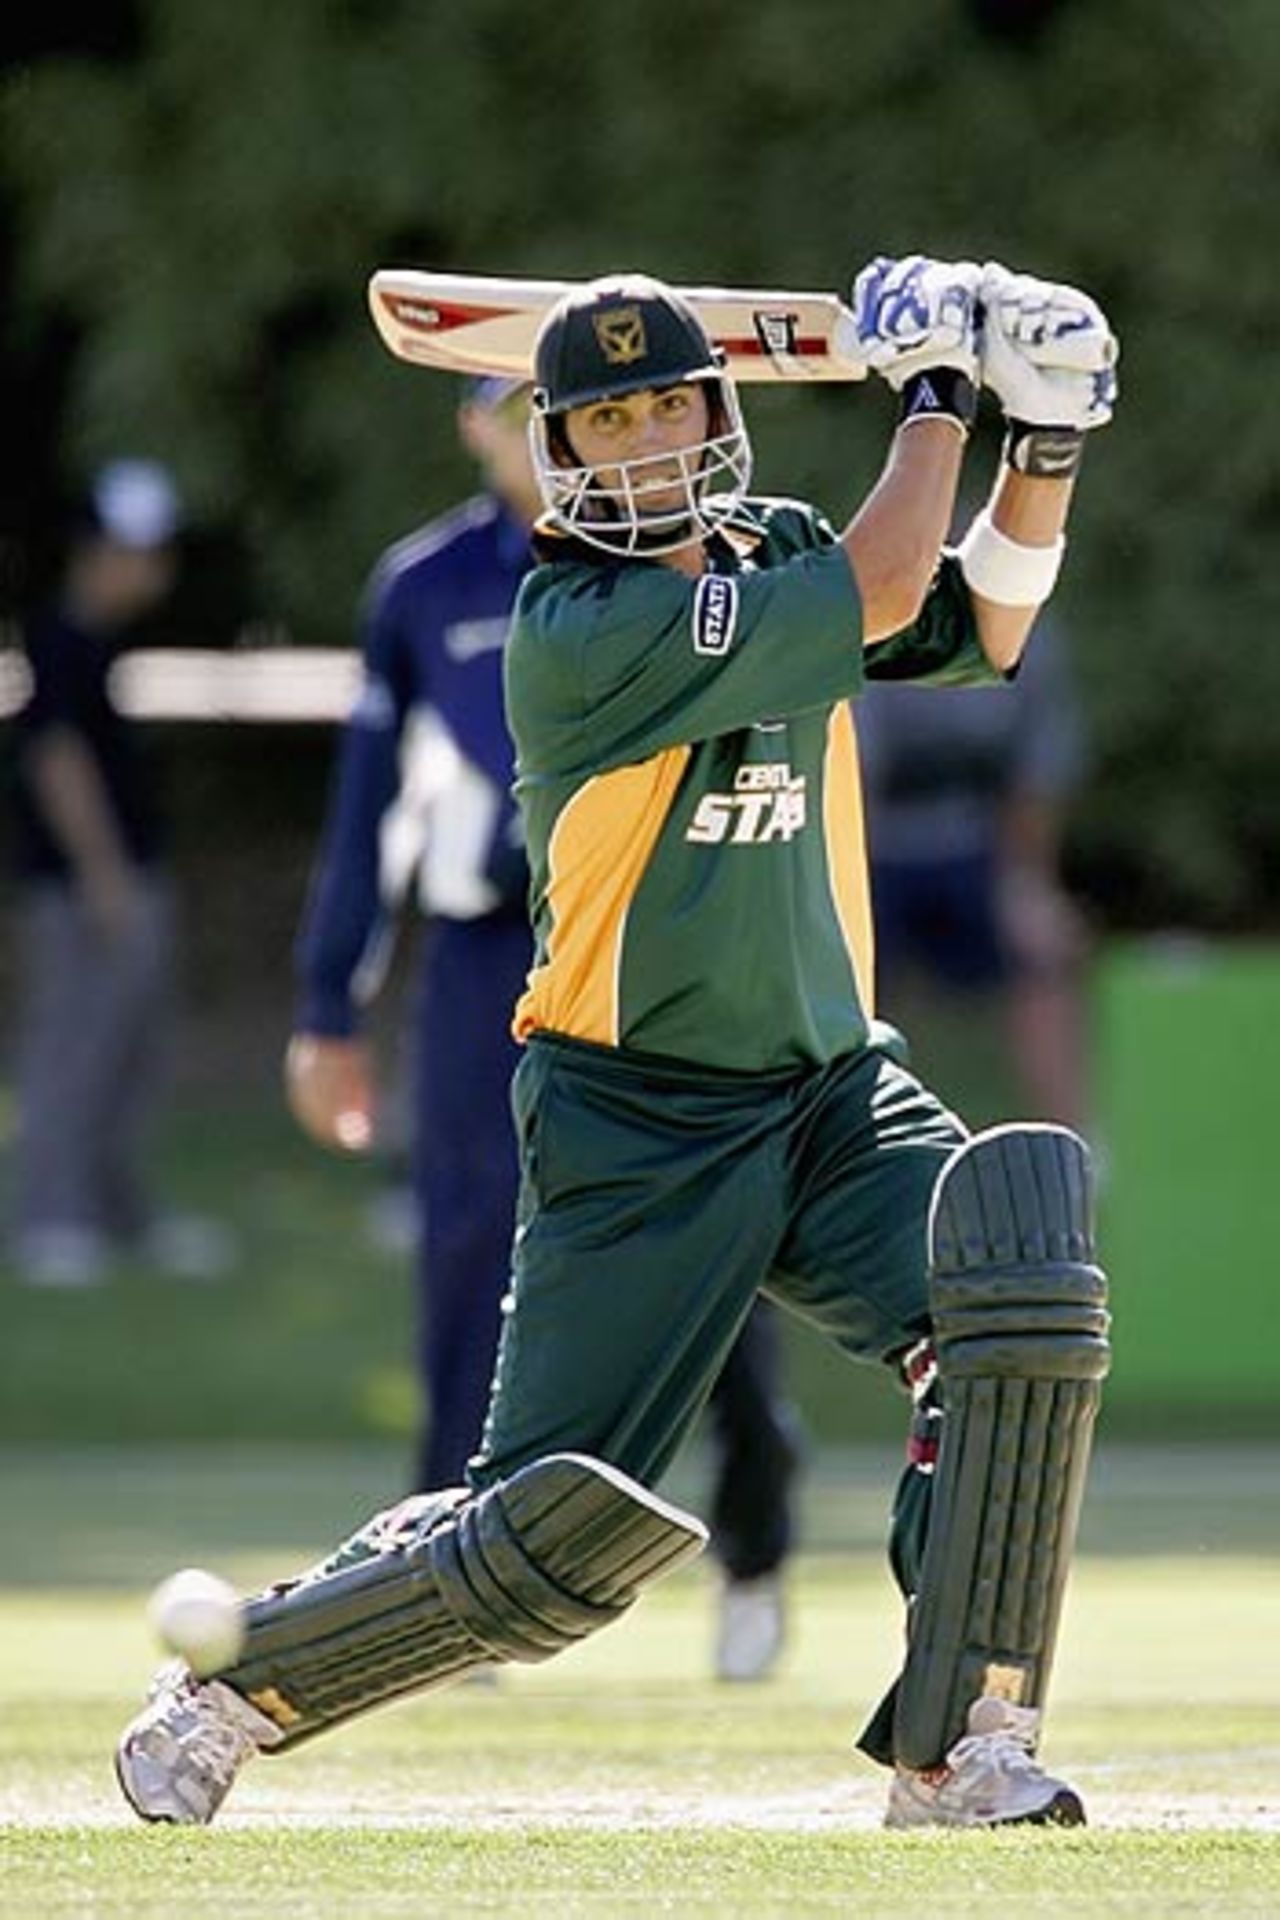 Mathew Sinclair drives during his innings of 42* for Central Districts, Auckland v Central Districts, State Shield, Auckland, January 18, 2006